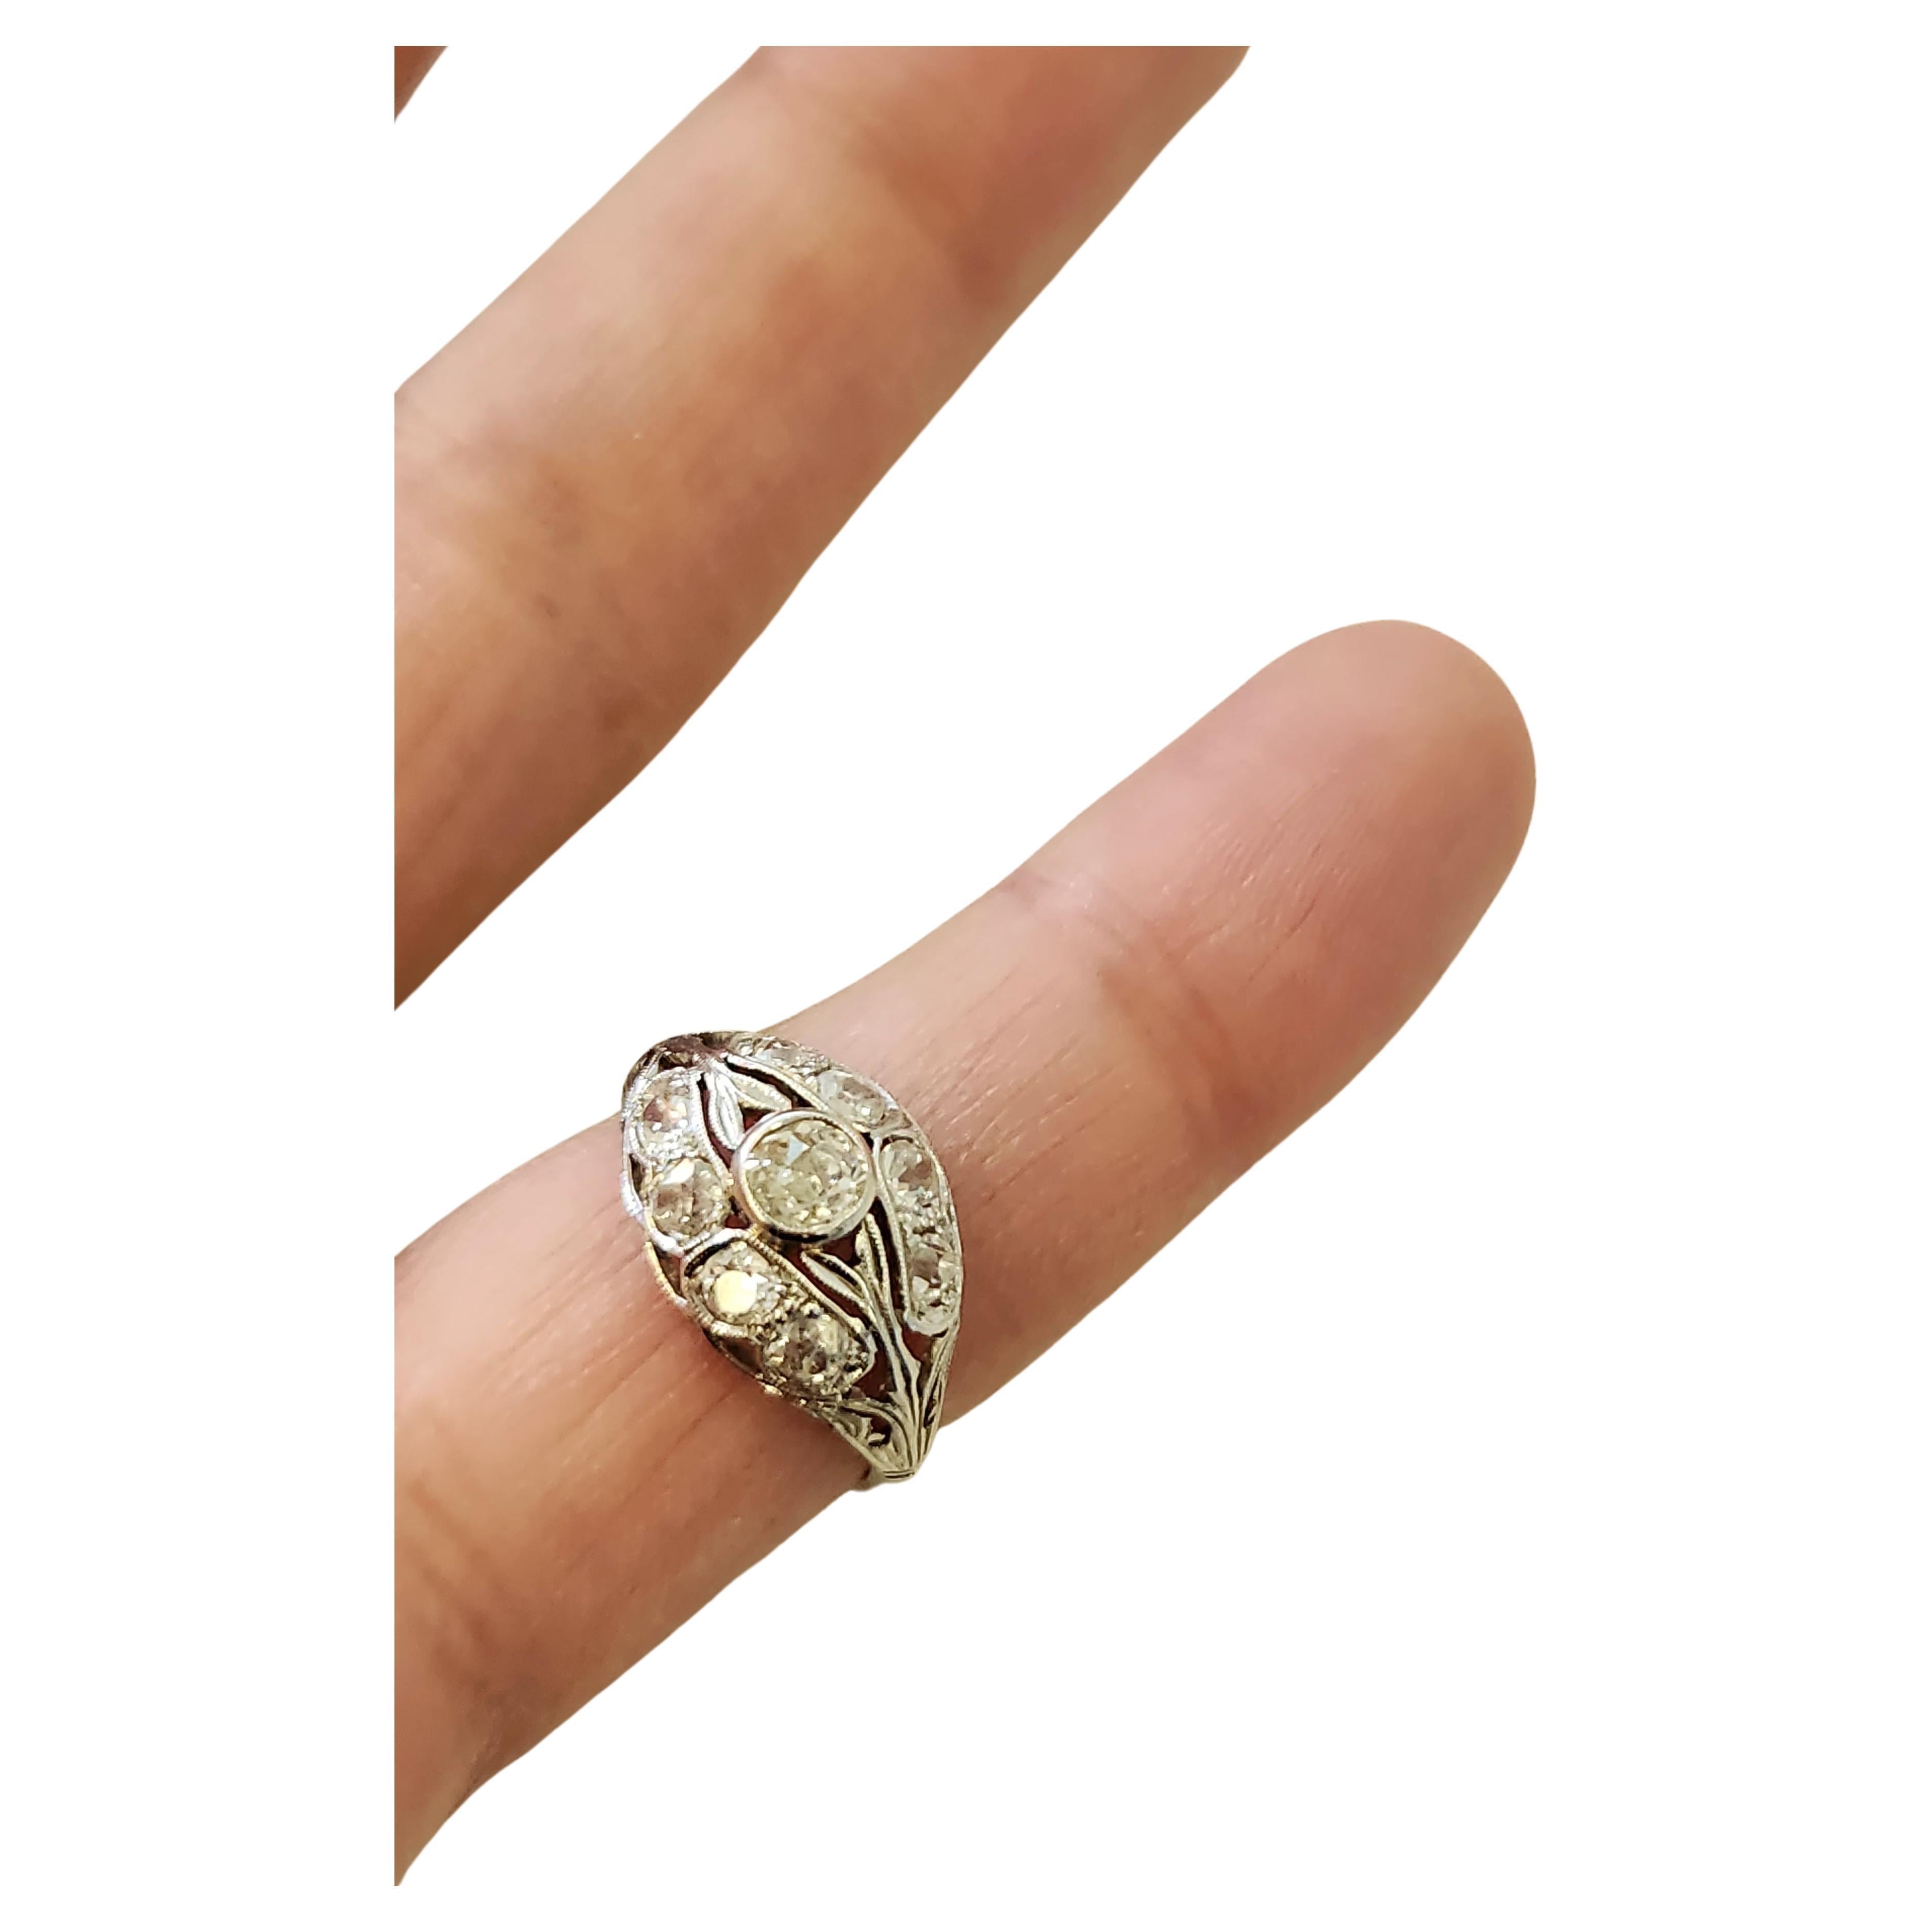 Art deco era white gold ring centered with old mine cut diamond flanked with several old mine cut diamonds with total estimate weight of 1.2 carats in detailed workmanship ring dates back to europe 1920/1925.c